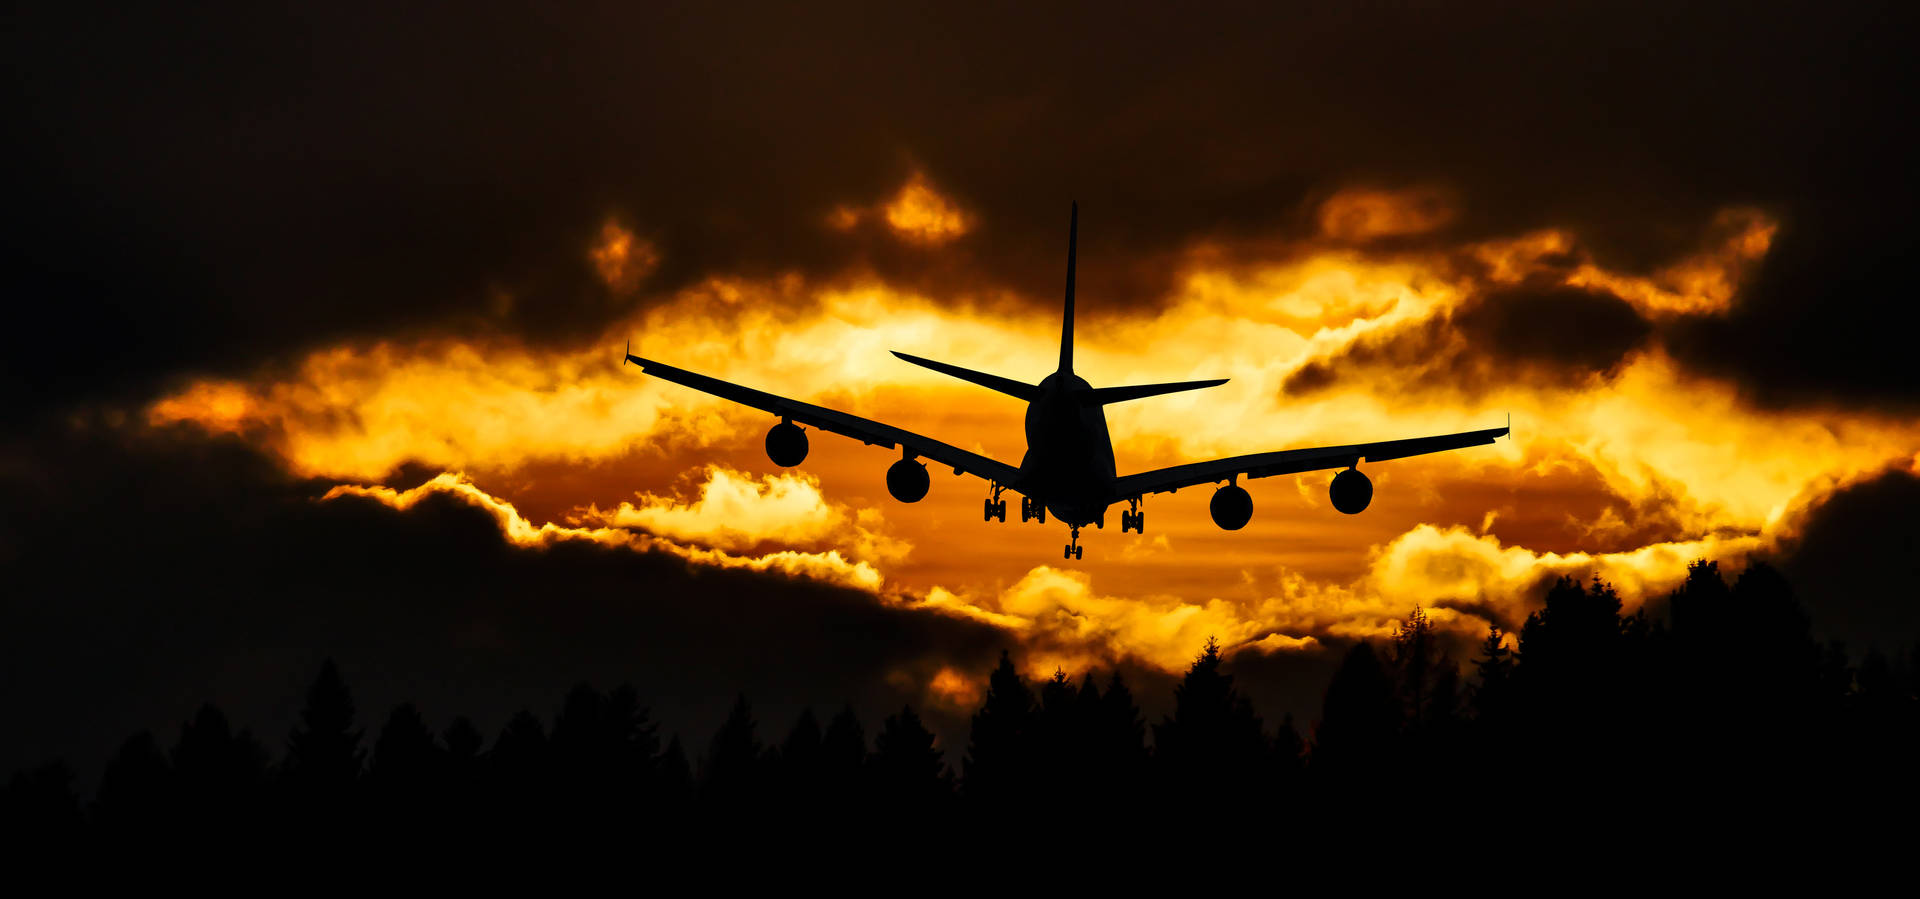 Airplane 8997X4211 Wallpaper and Background Image